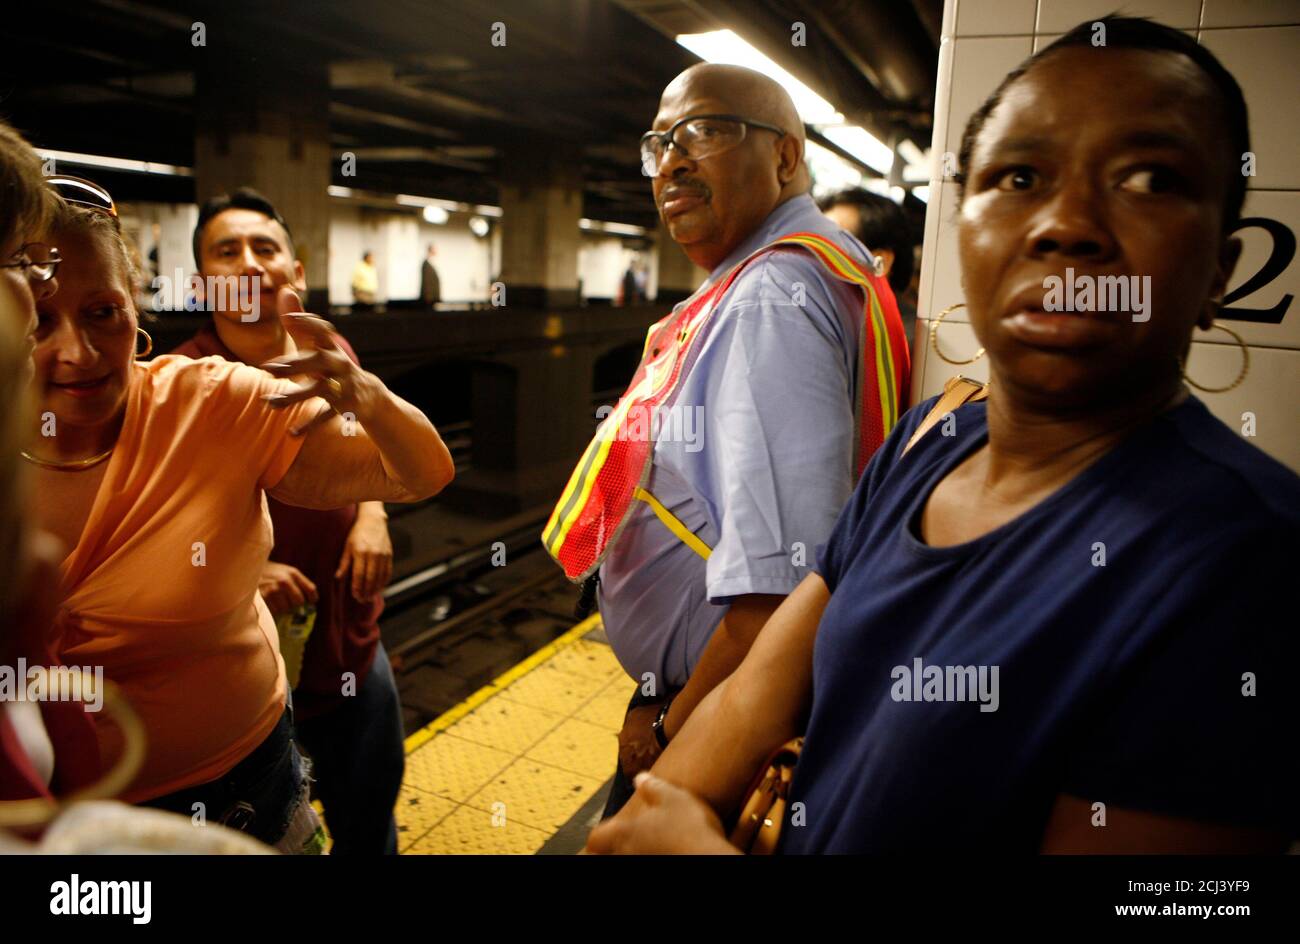 A New York MTA employee (C) gives directions to a commuters during the evening rush after the trains were shut down as a result of a power outage in parts of New York June 27, 2007. A power outage struck parts of Manhattan's wealthy Upper East Side during a heat wave on Wednesday, shutting down some subway service and schools while forcing an evacuation of a major art museum.  REUTERS/Brendan McDermid (UNITED STATES) Stock Photo